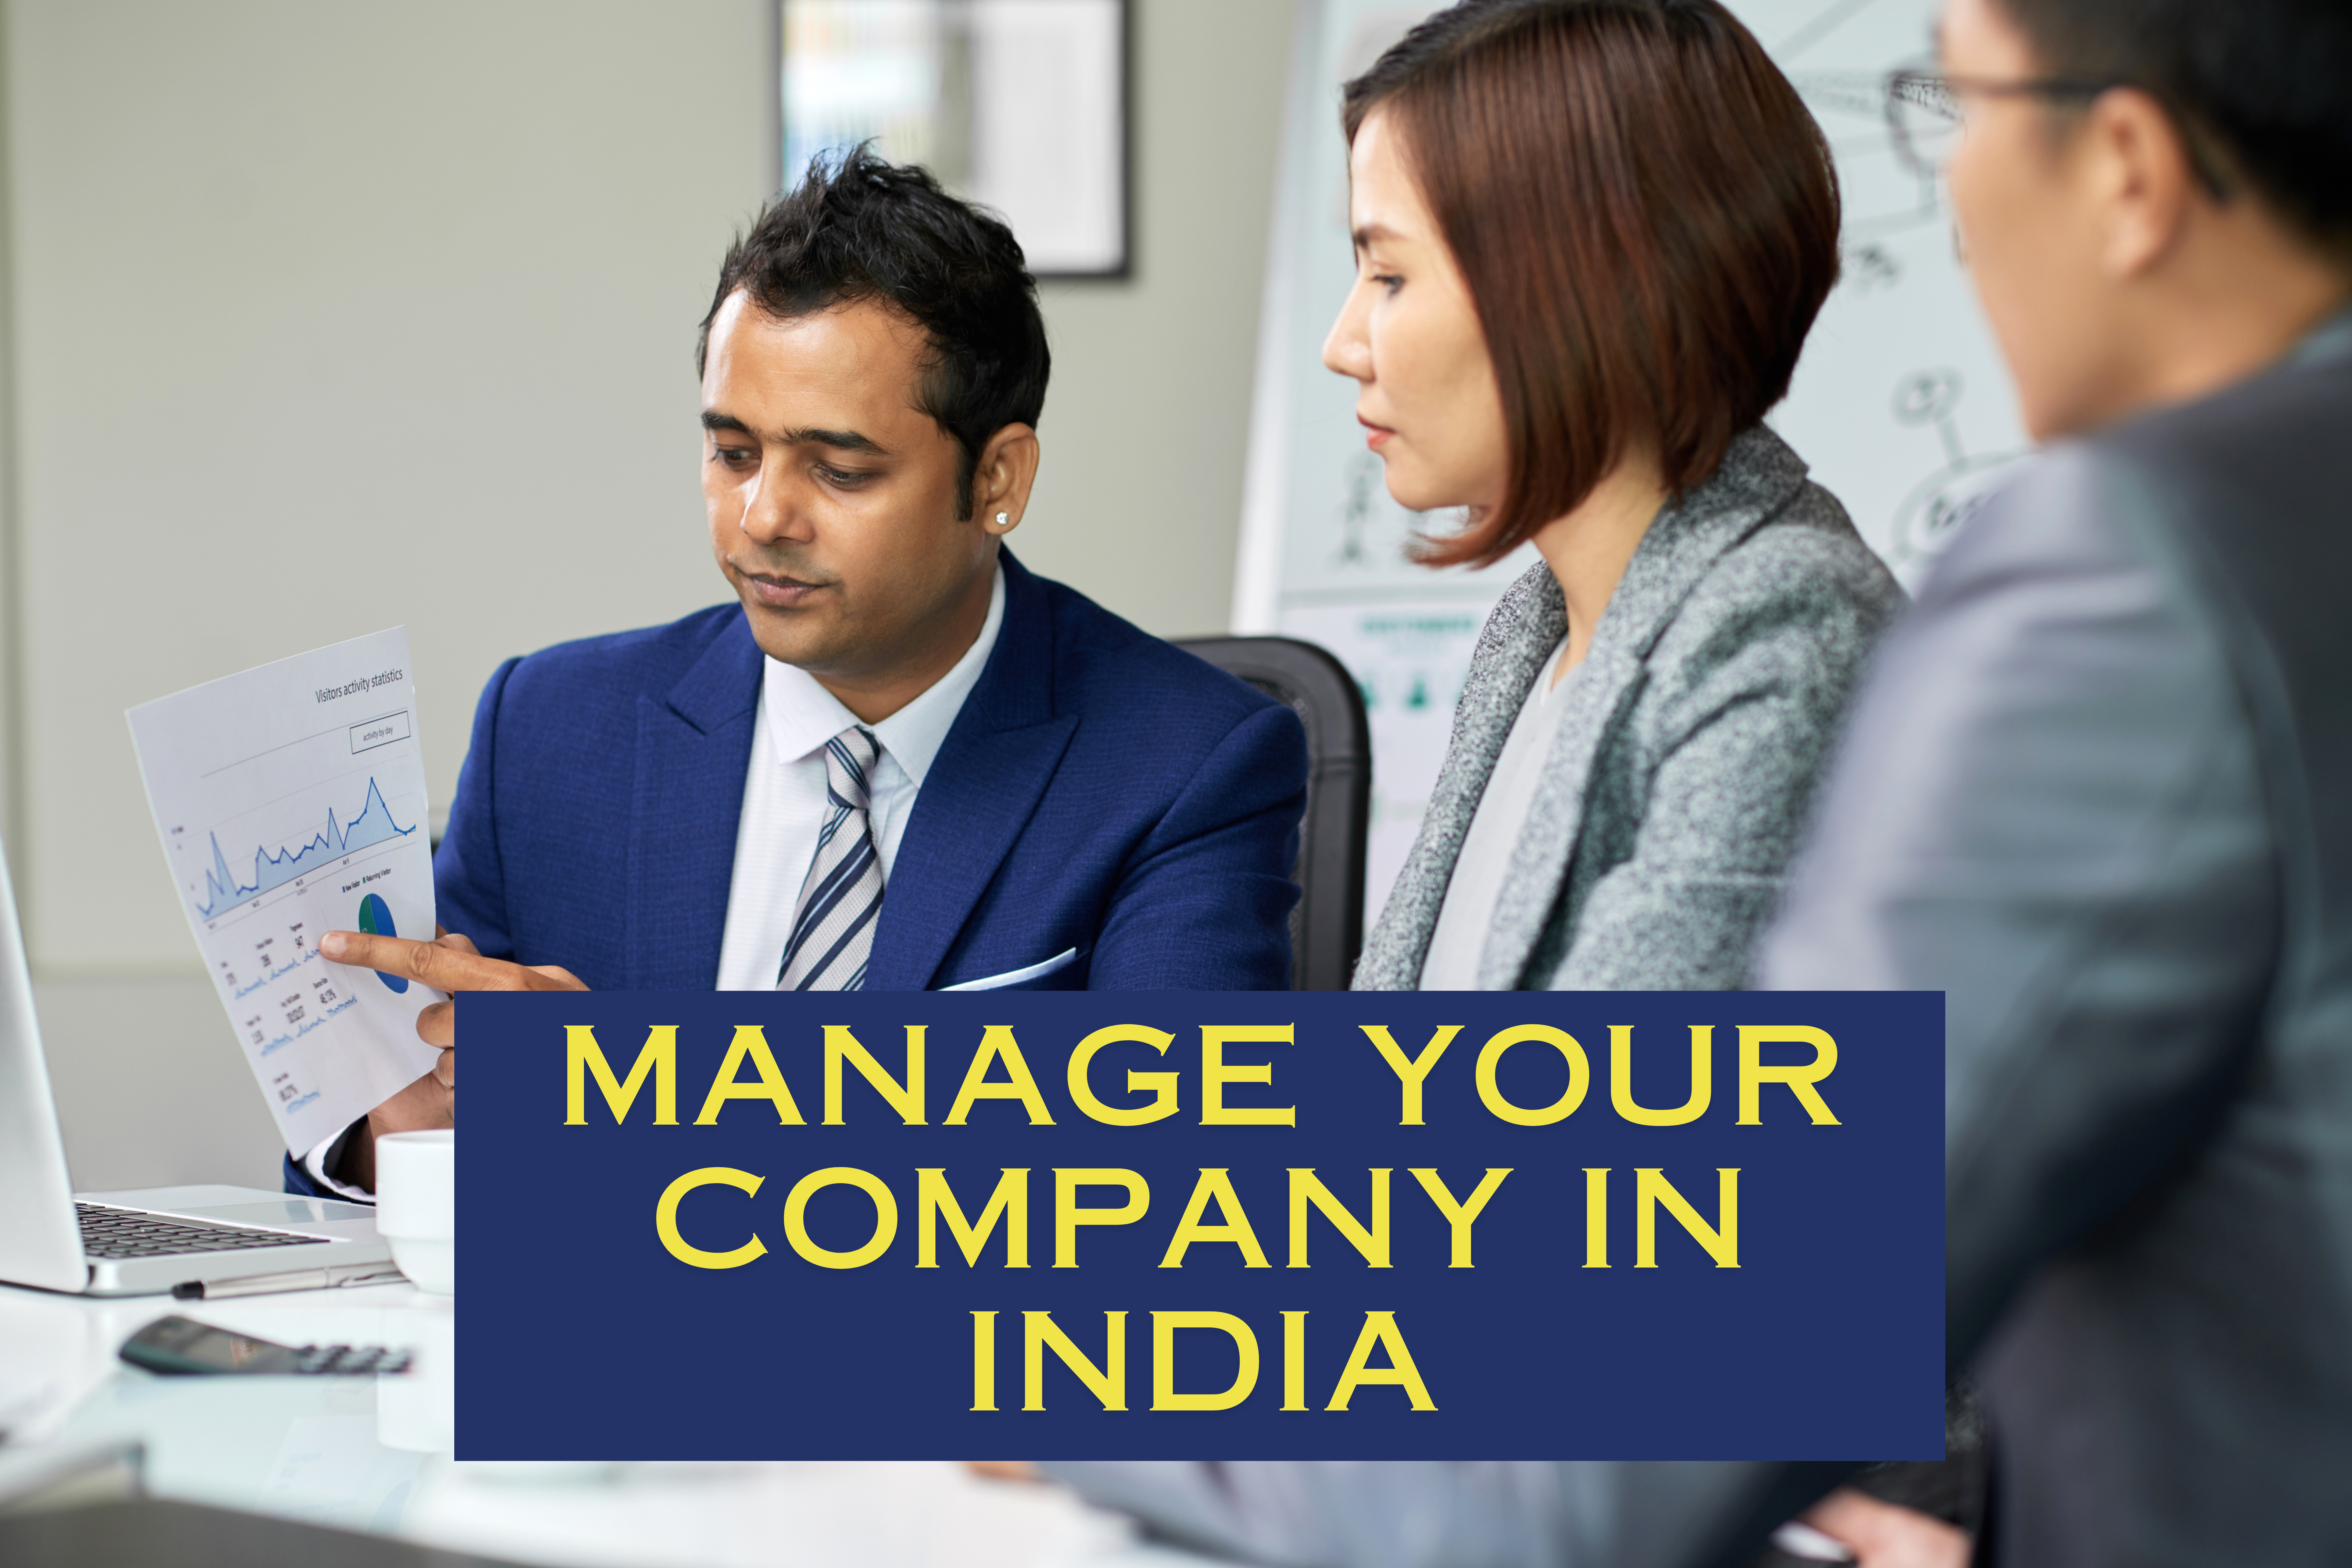 Manage Your Company in India